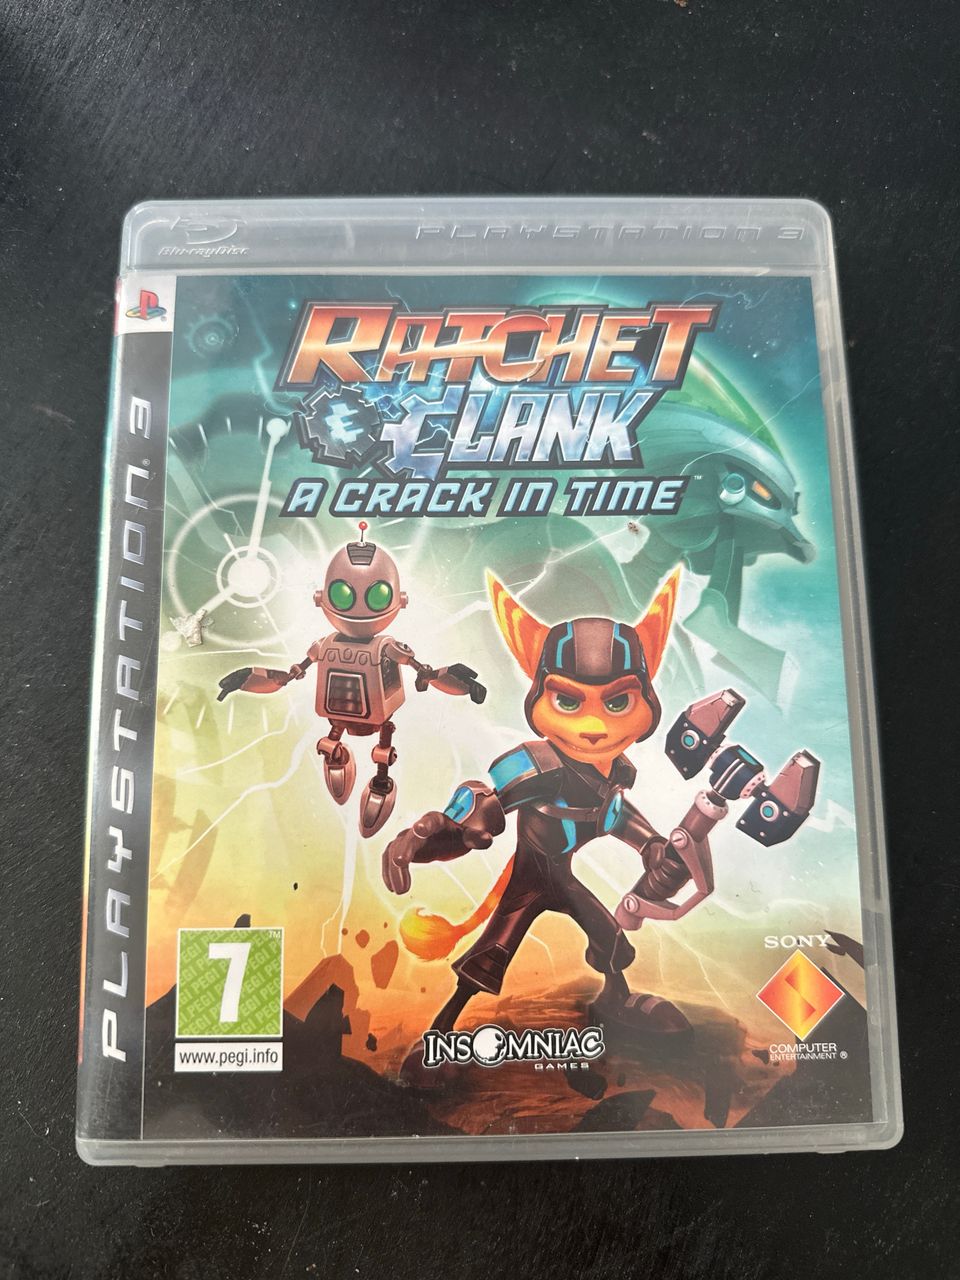 Ratchet Clank a crack in time